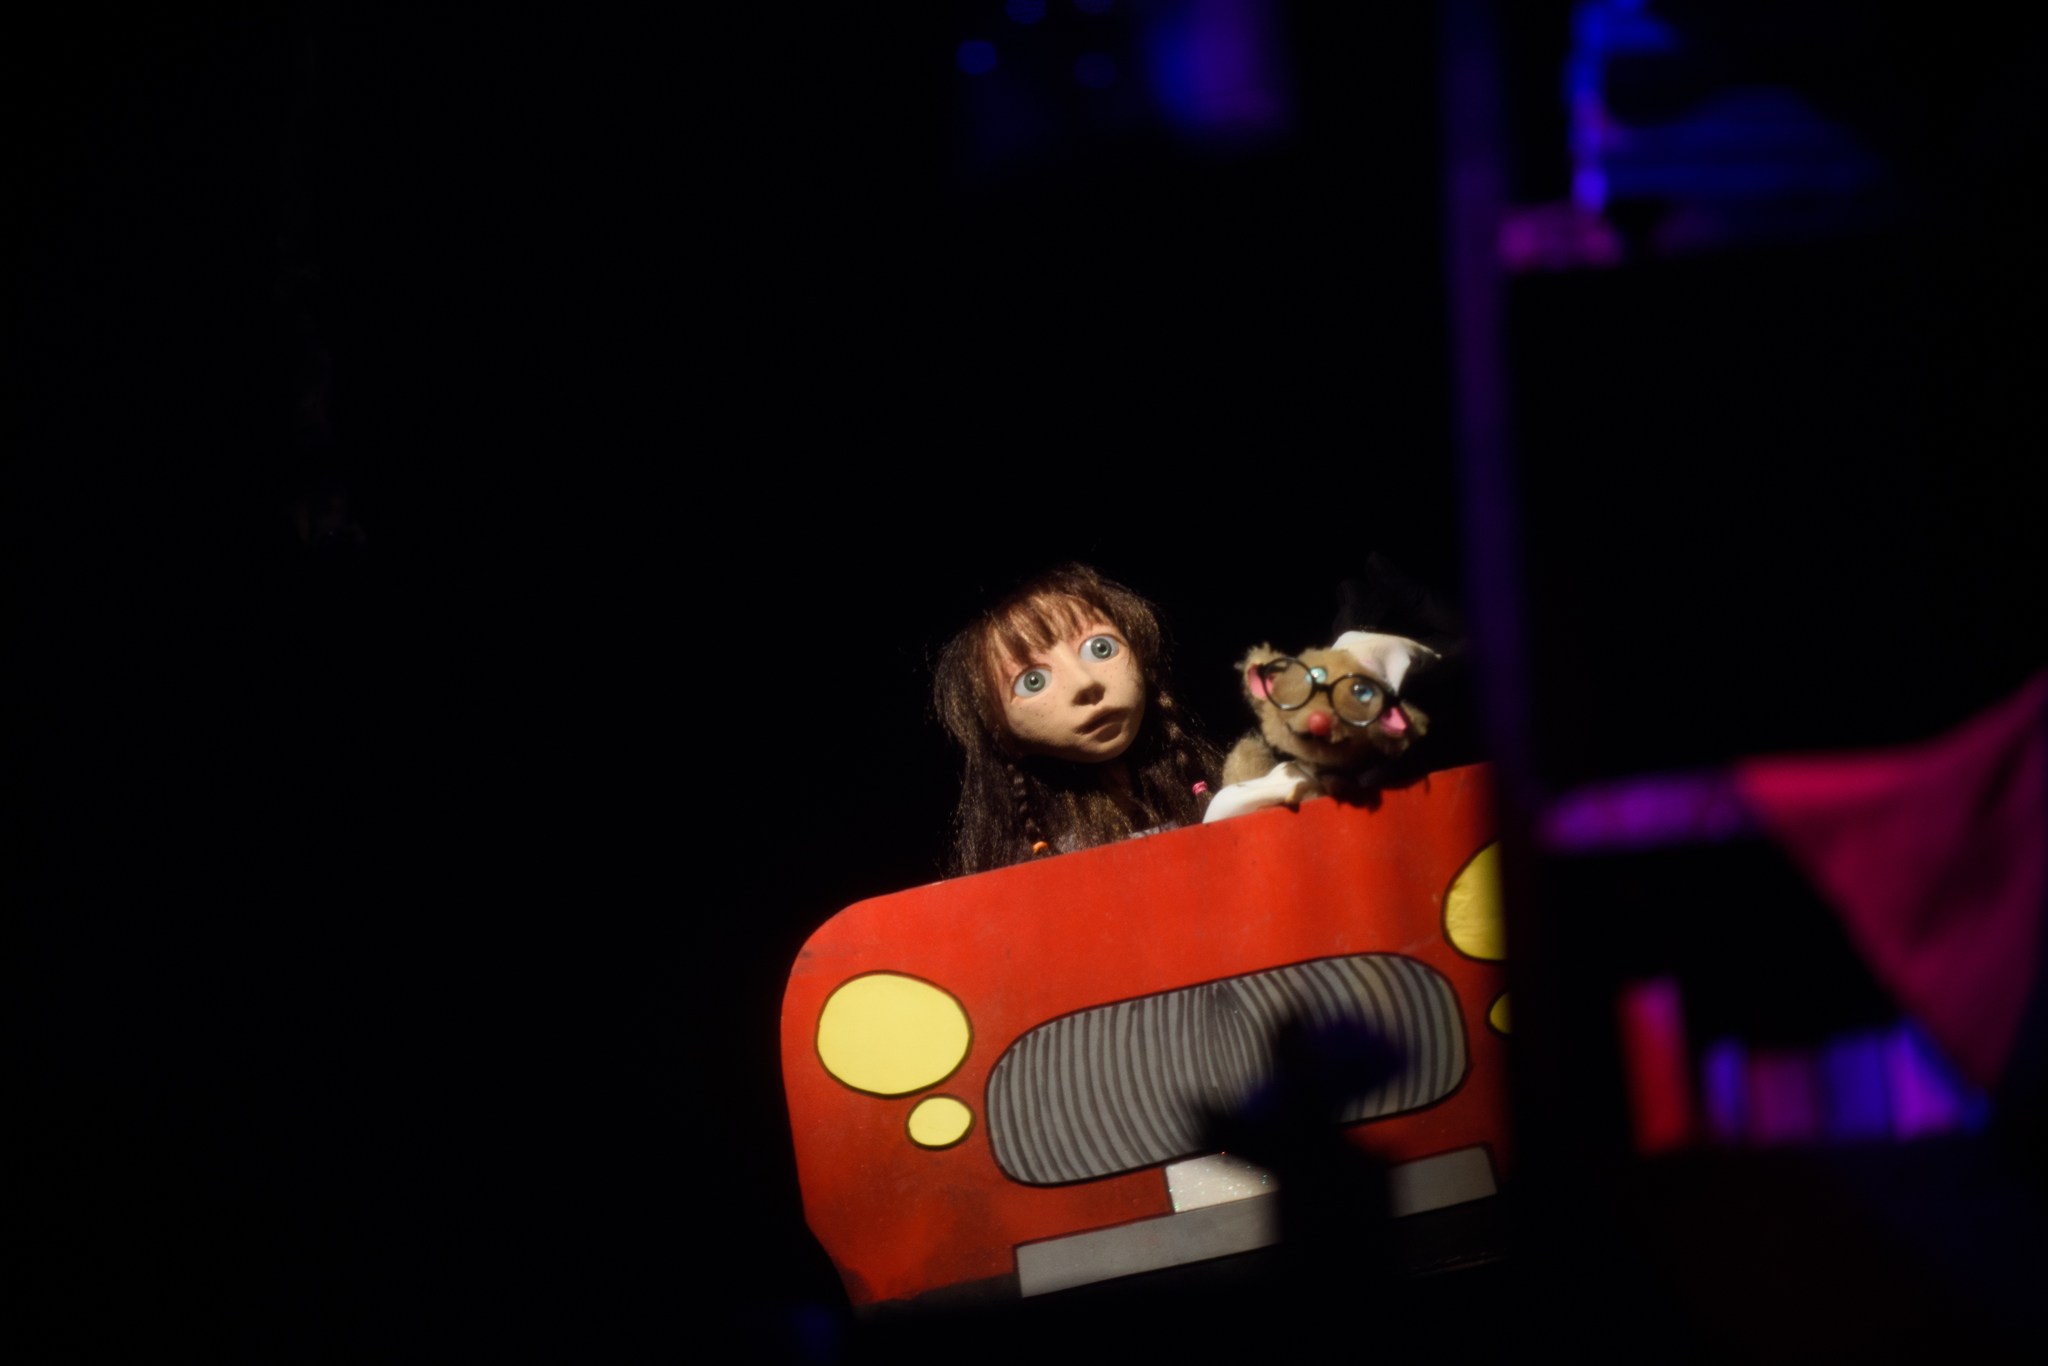 A puppet girl sits in a red car